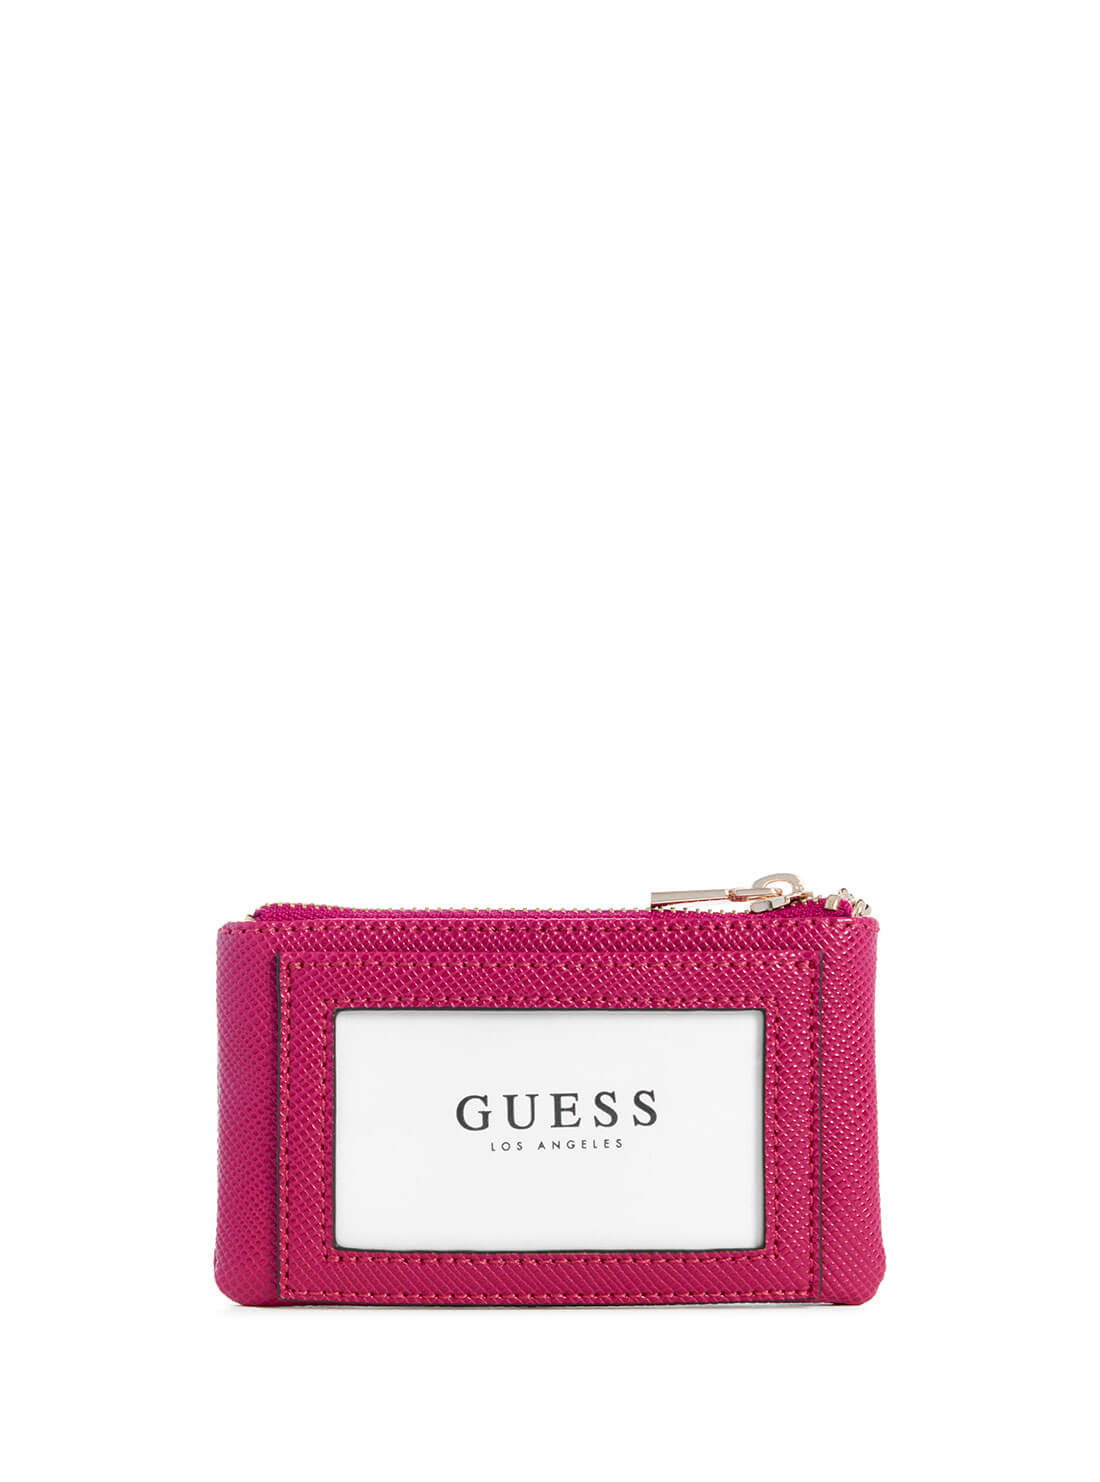 Women's Boysenberry Pink Brynlee Zip Pouch back view